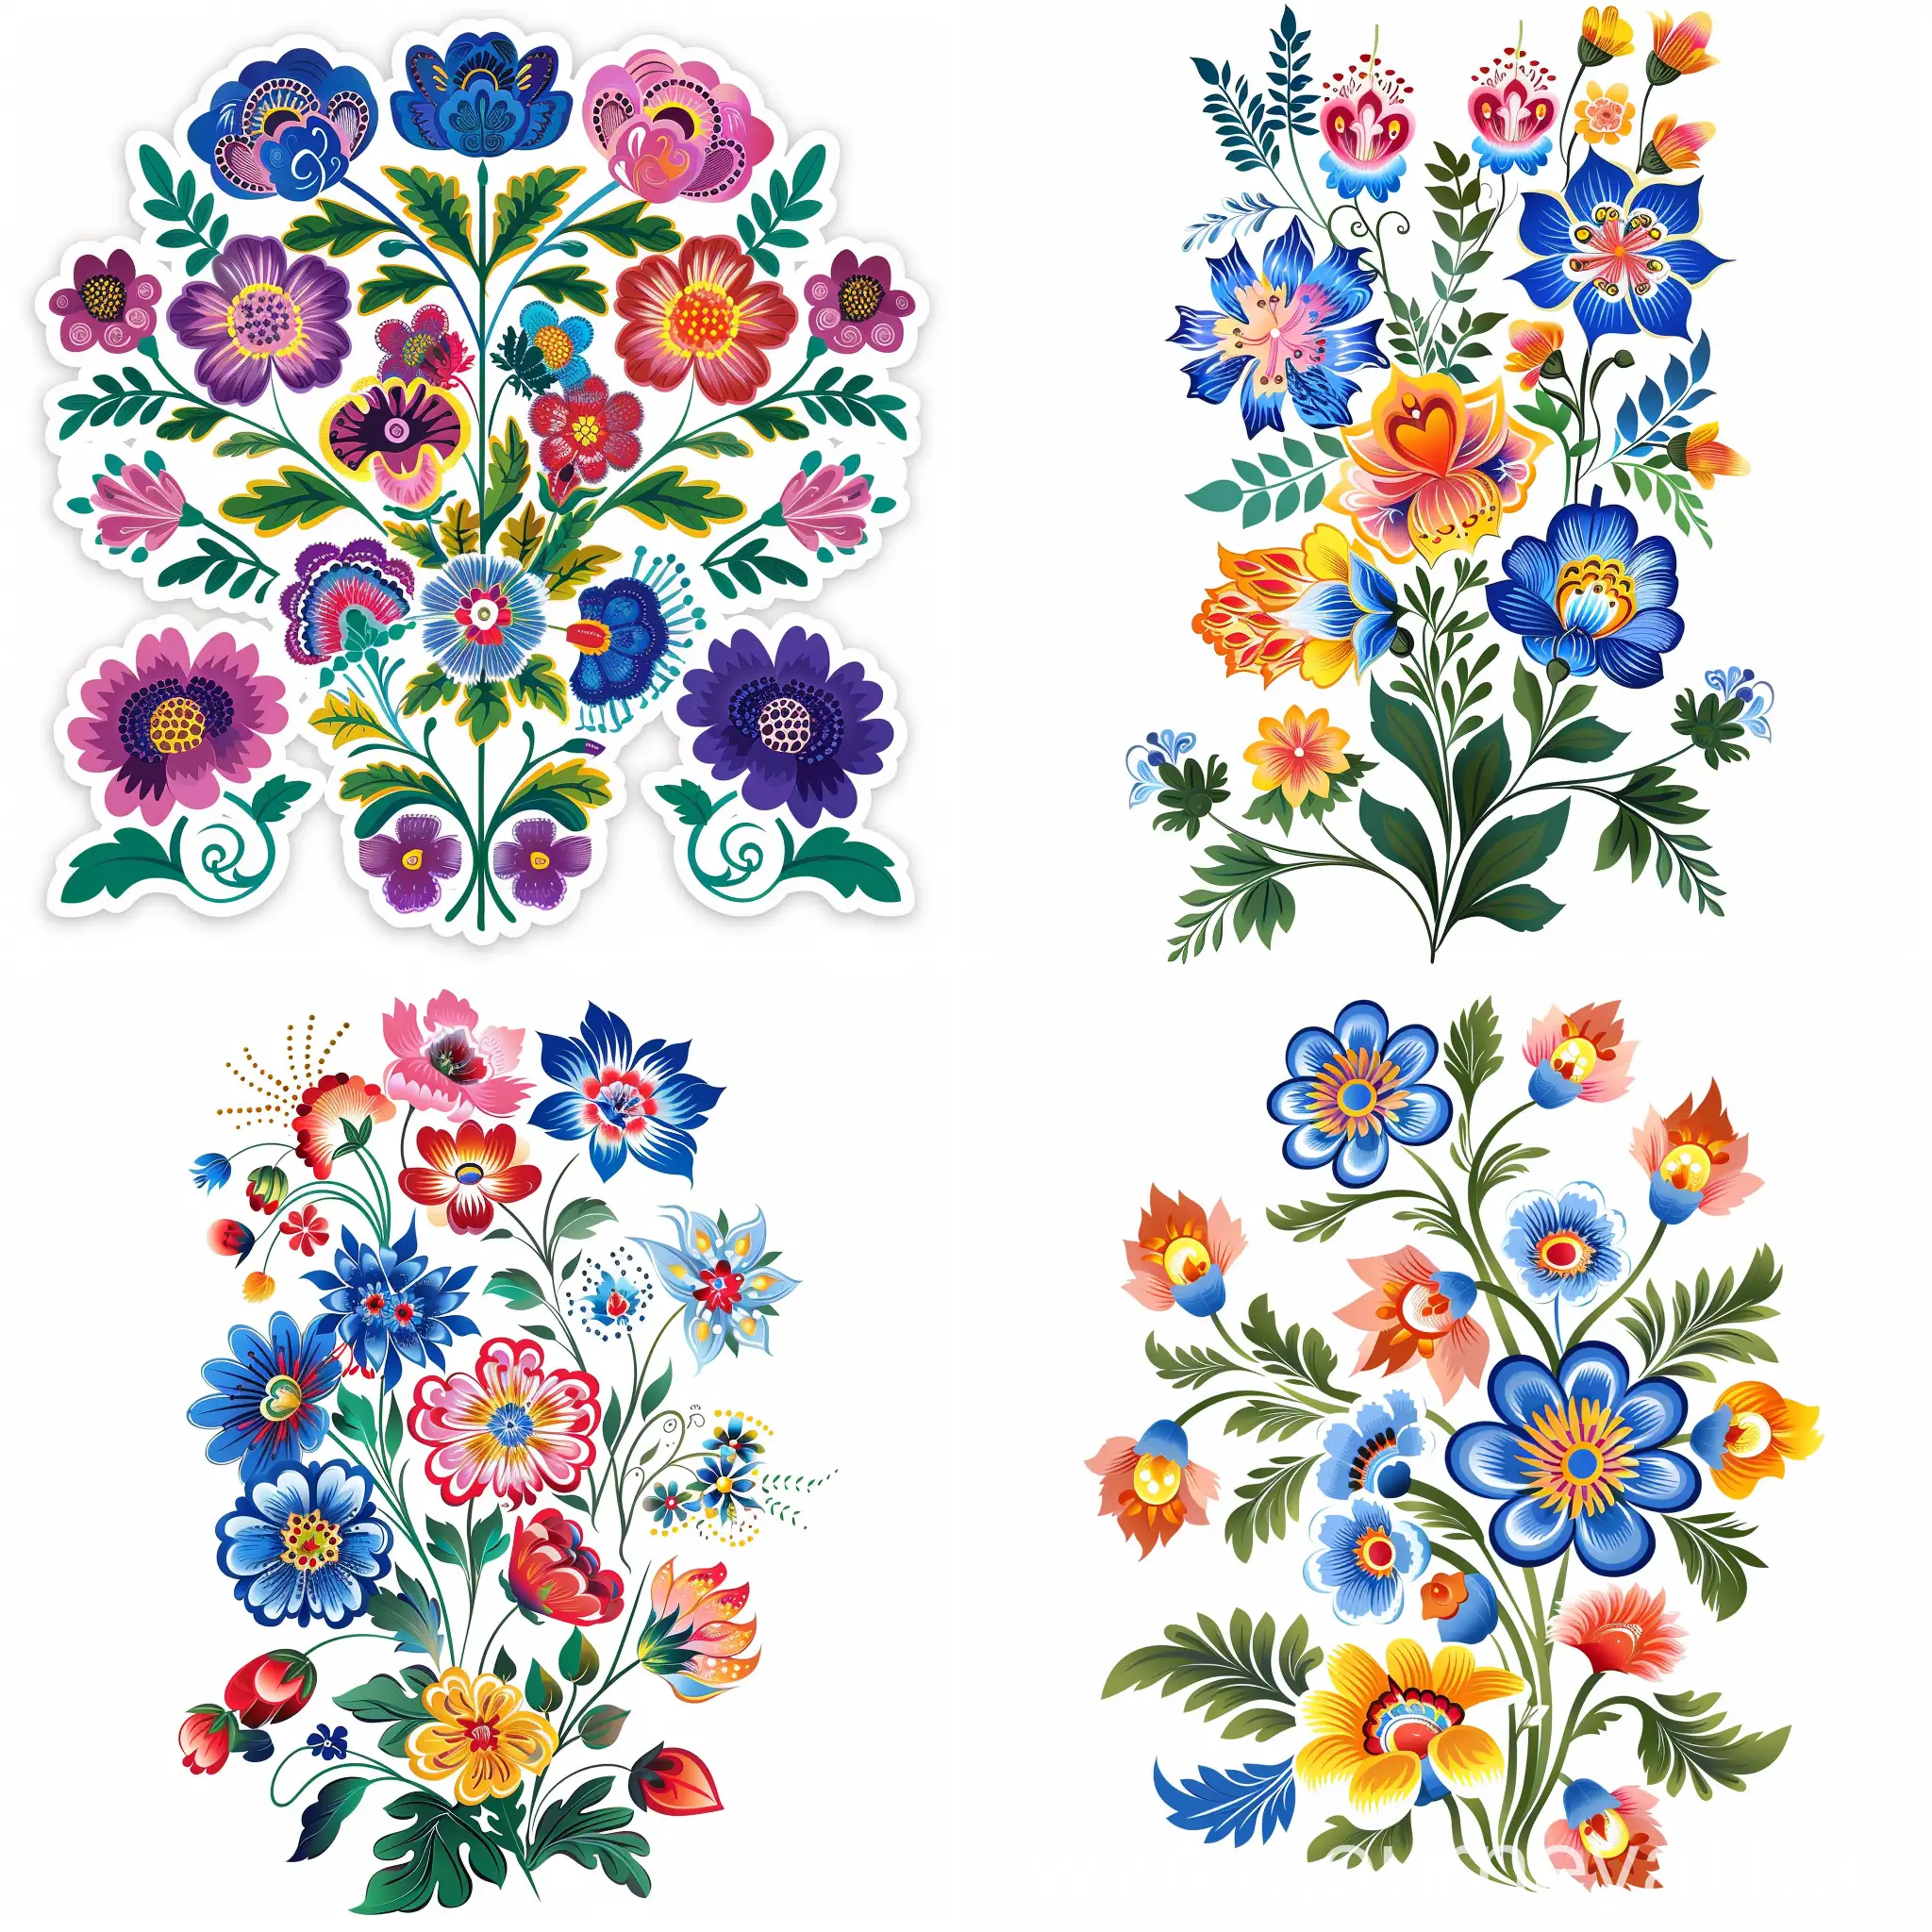 sticker design of flowers in the style of gzhel painting, high quality detailed in flat style